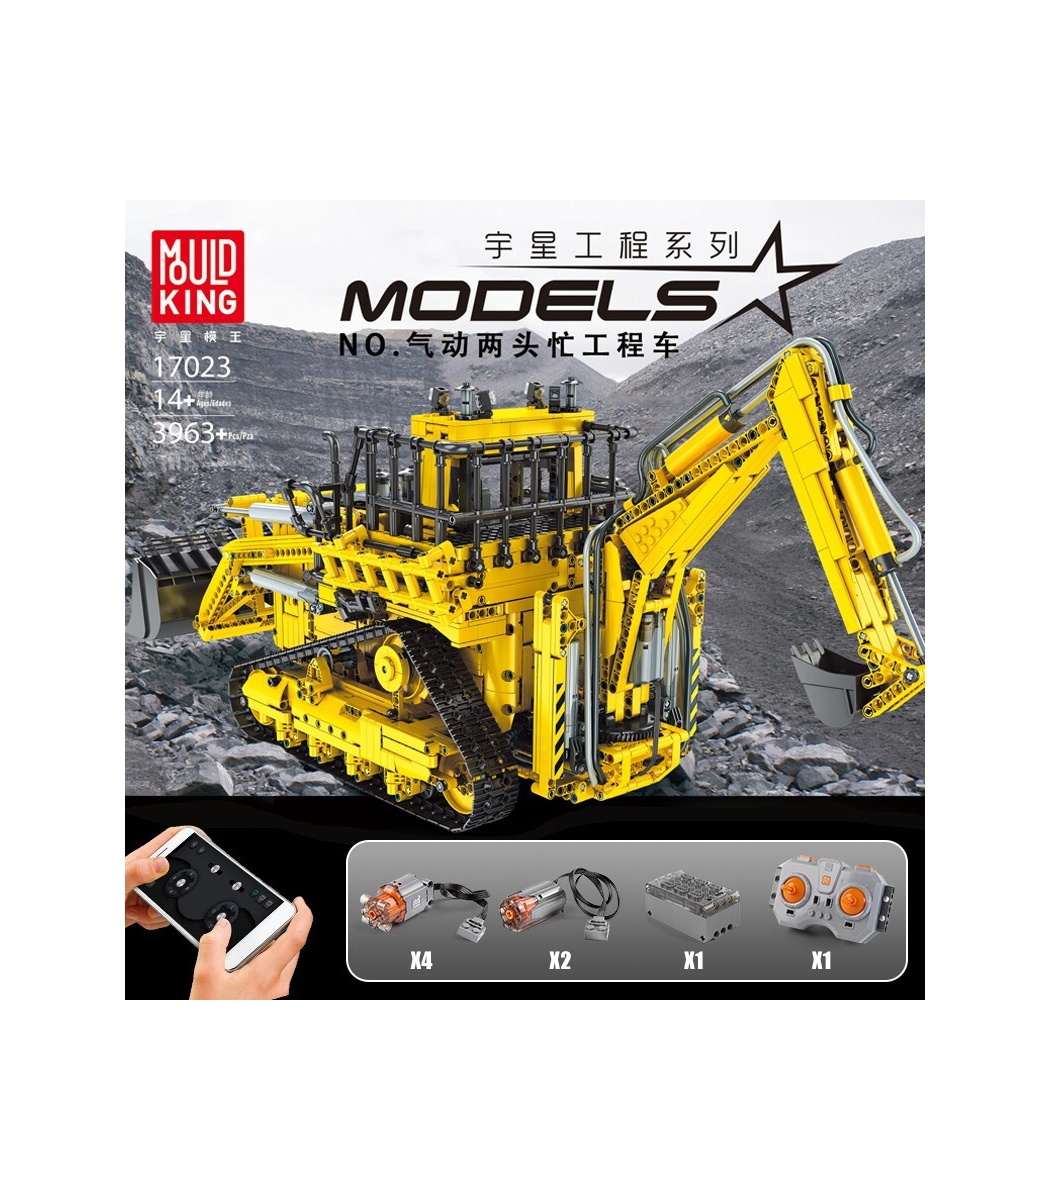  Mould King 17026 Pneumatic Loader Building Blocks Kits,  Technical Construction Vehicles Model with Motor/APP Remote Control, Gift  Toy for Kids Age 8+ /Adult Collections Enthusiasts(1803 Pieces) : Toys &  Games